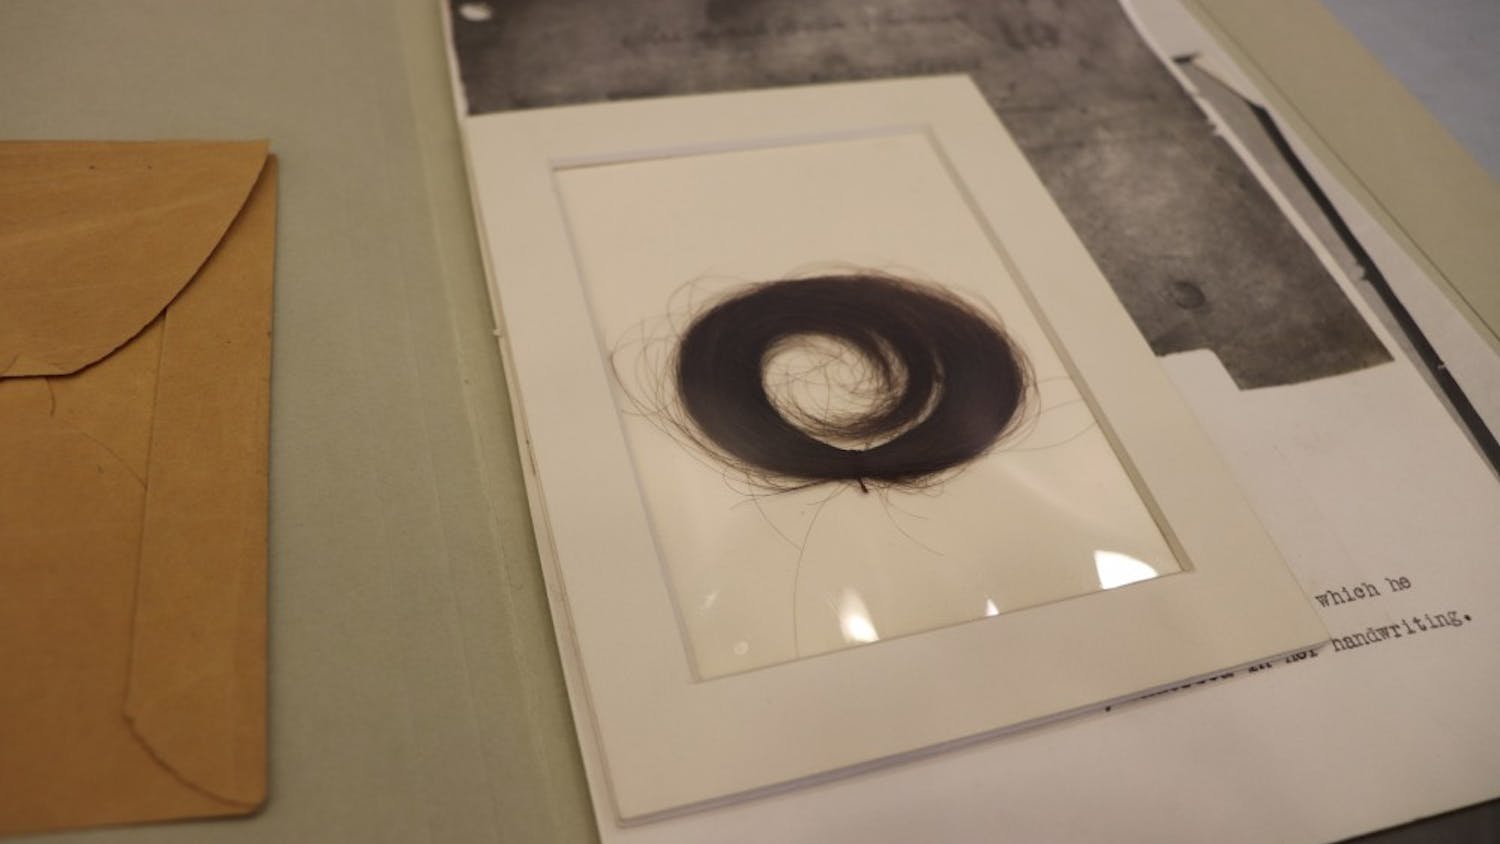 Edgar Allen Poe's hair is on display, along with Sylvia Plath's, in the Lilly Library. The Poe collection has been at IU since 1956.